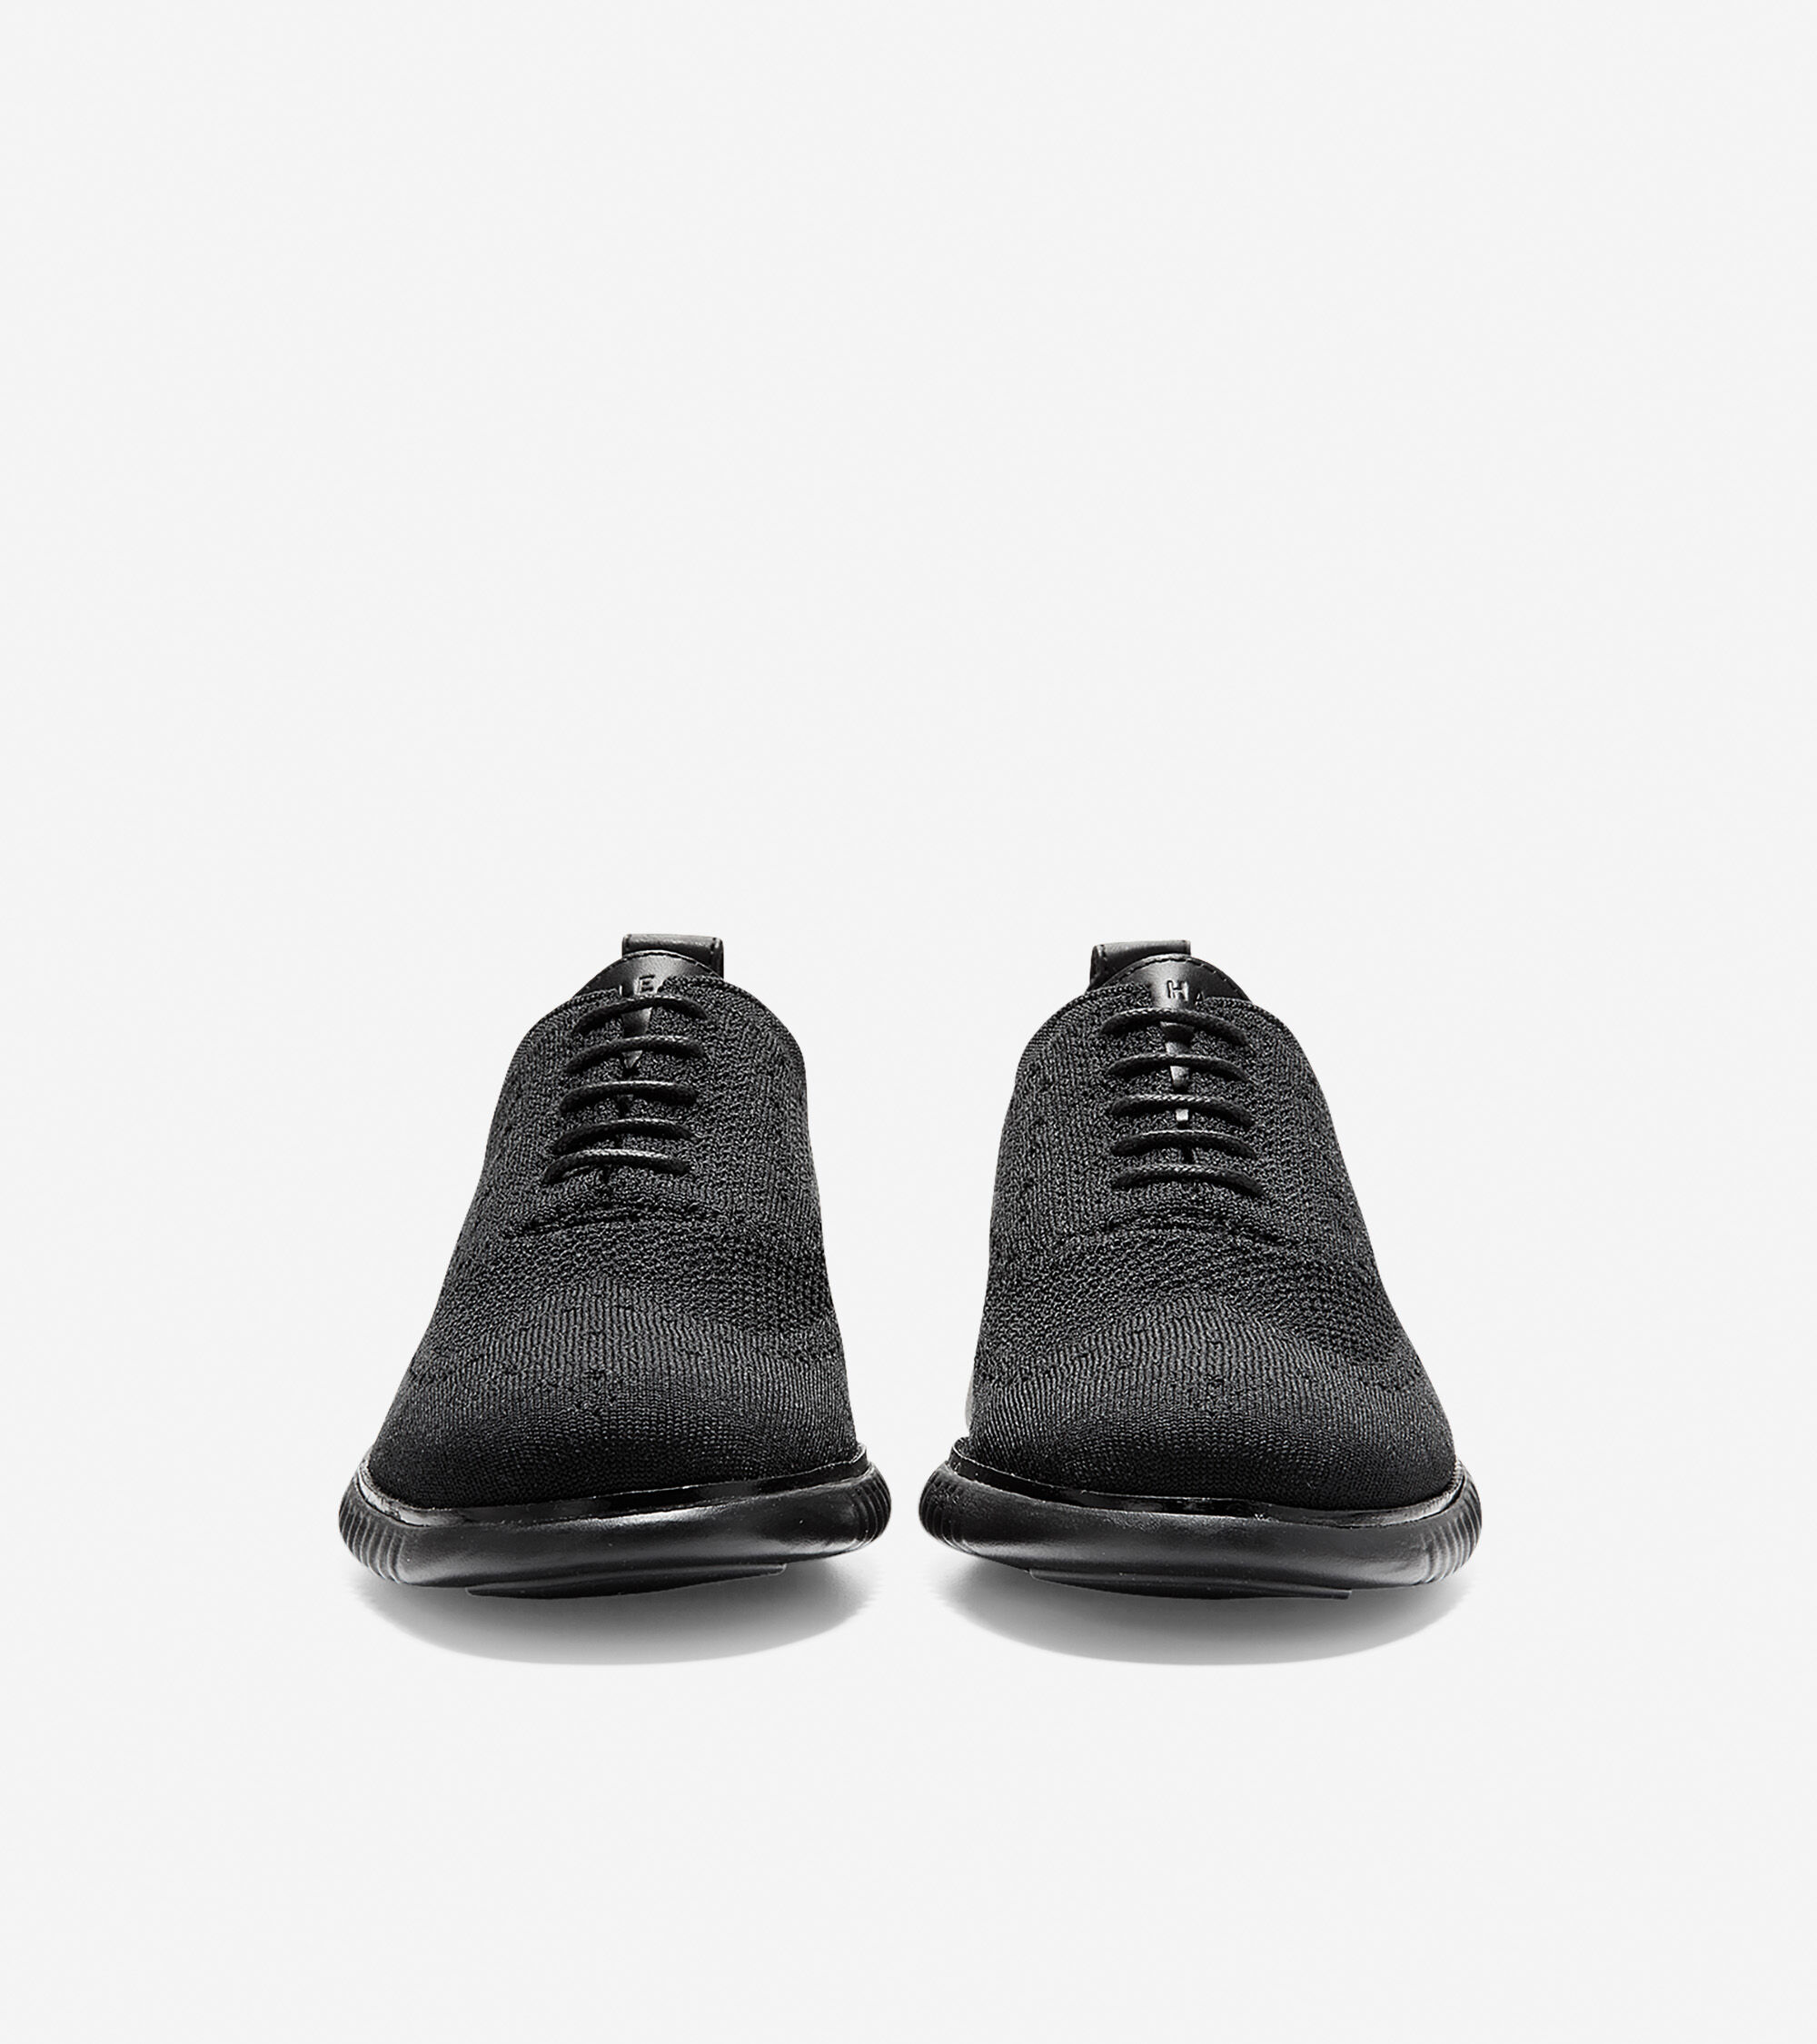 Cole haan Men's ZERØGRAND Lined Wingtip Oxford with Stitchlite 